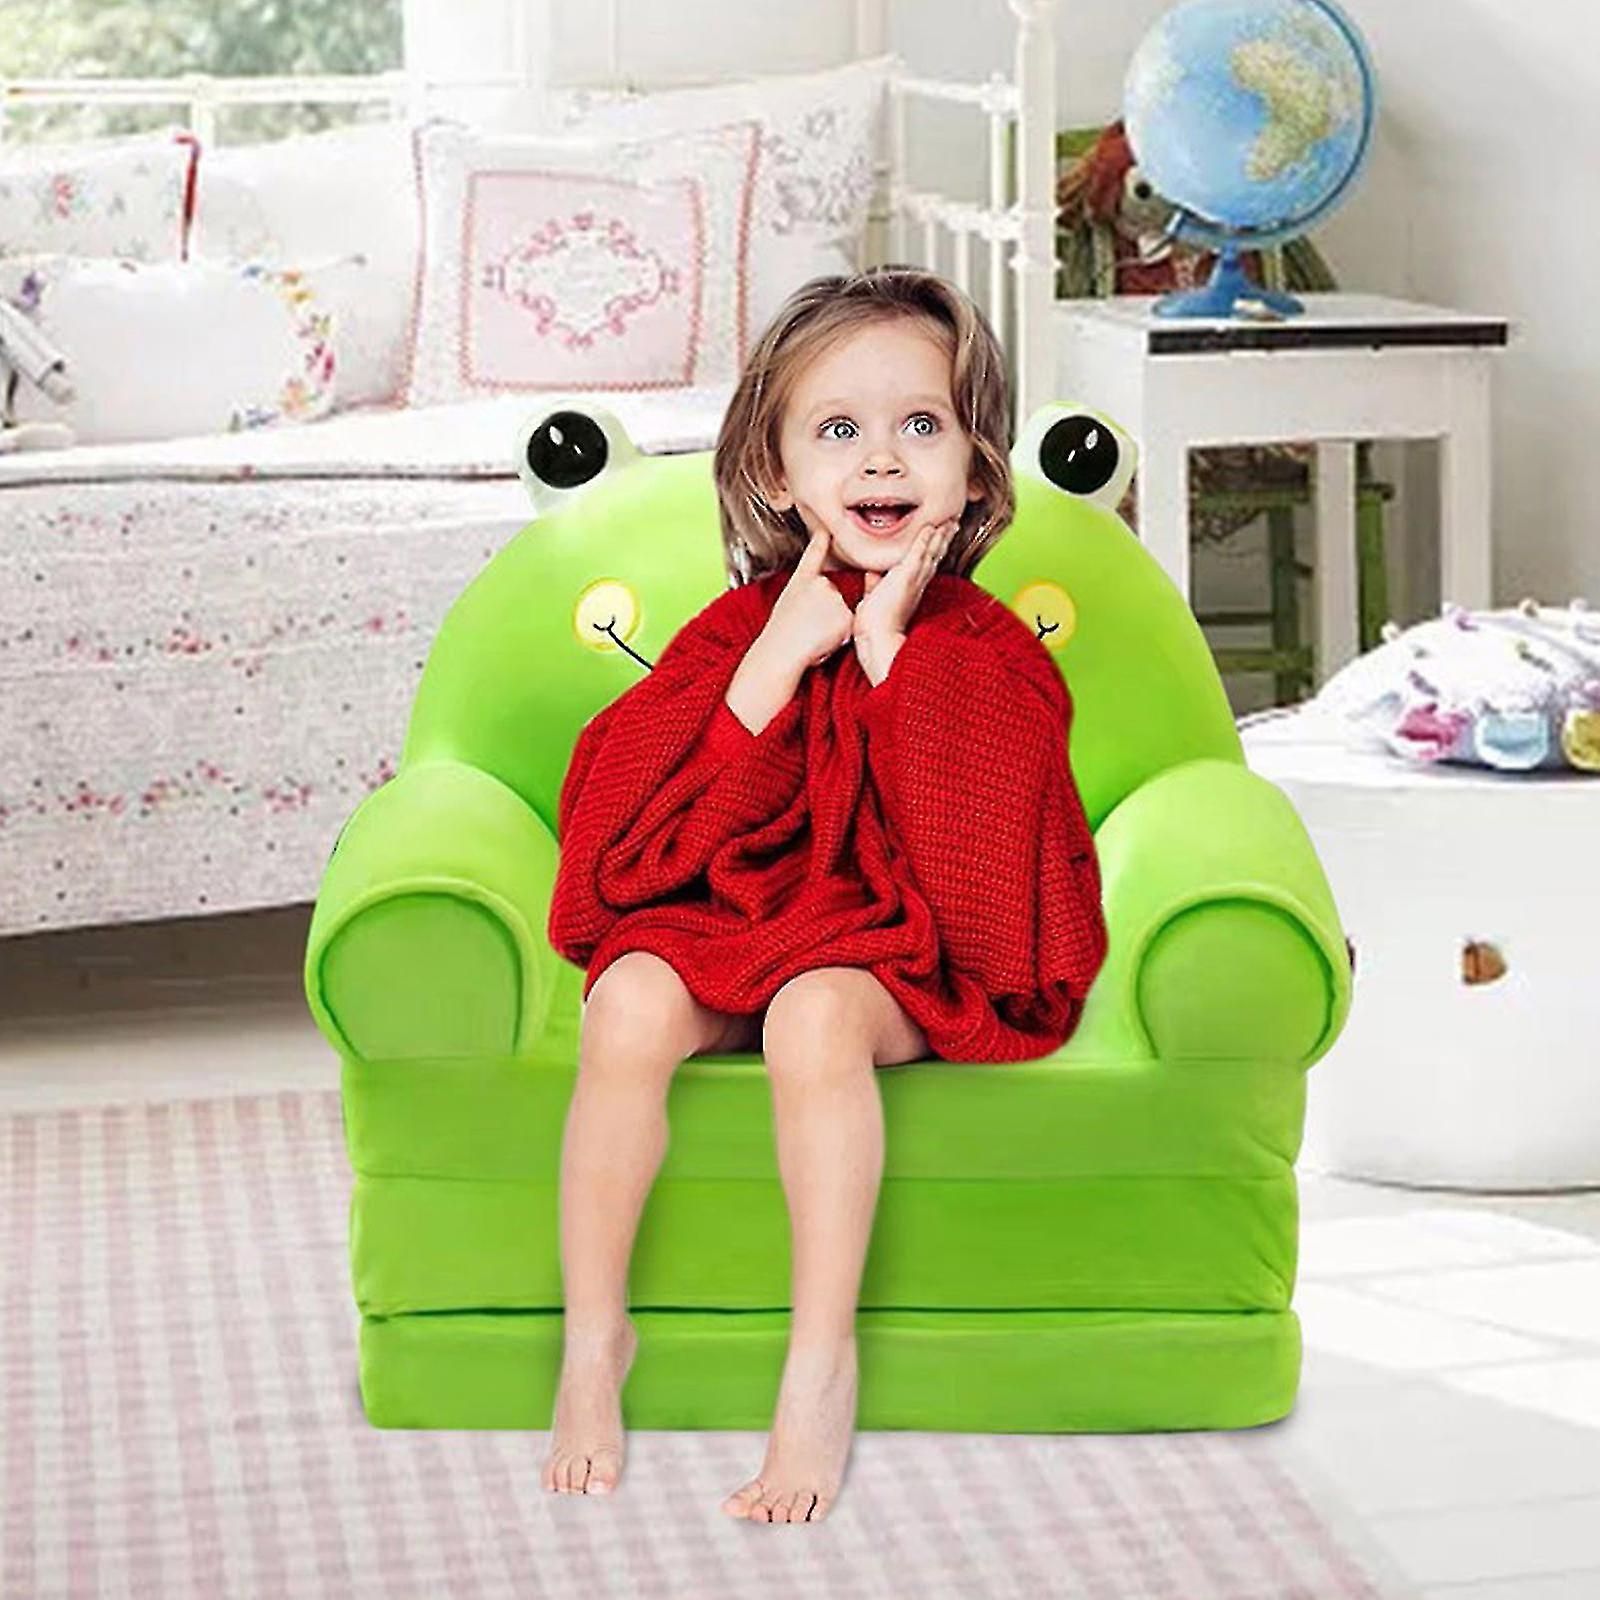 2 In 1 Foldable Plush Foldable Kids Sofa Backrest Armchair Children Sofa  Cute High Quality(without Liner Filler ) | Fruugo Bh For 2 In 1 Foldable Sofas (View 5 of 15)